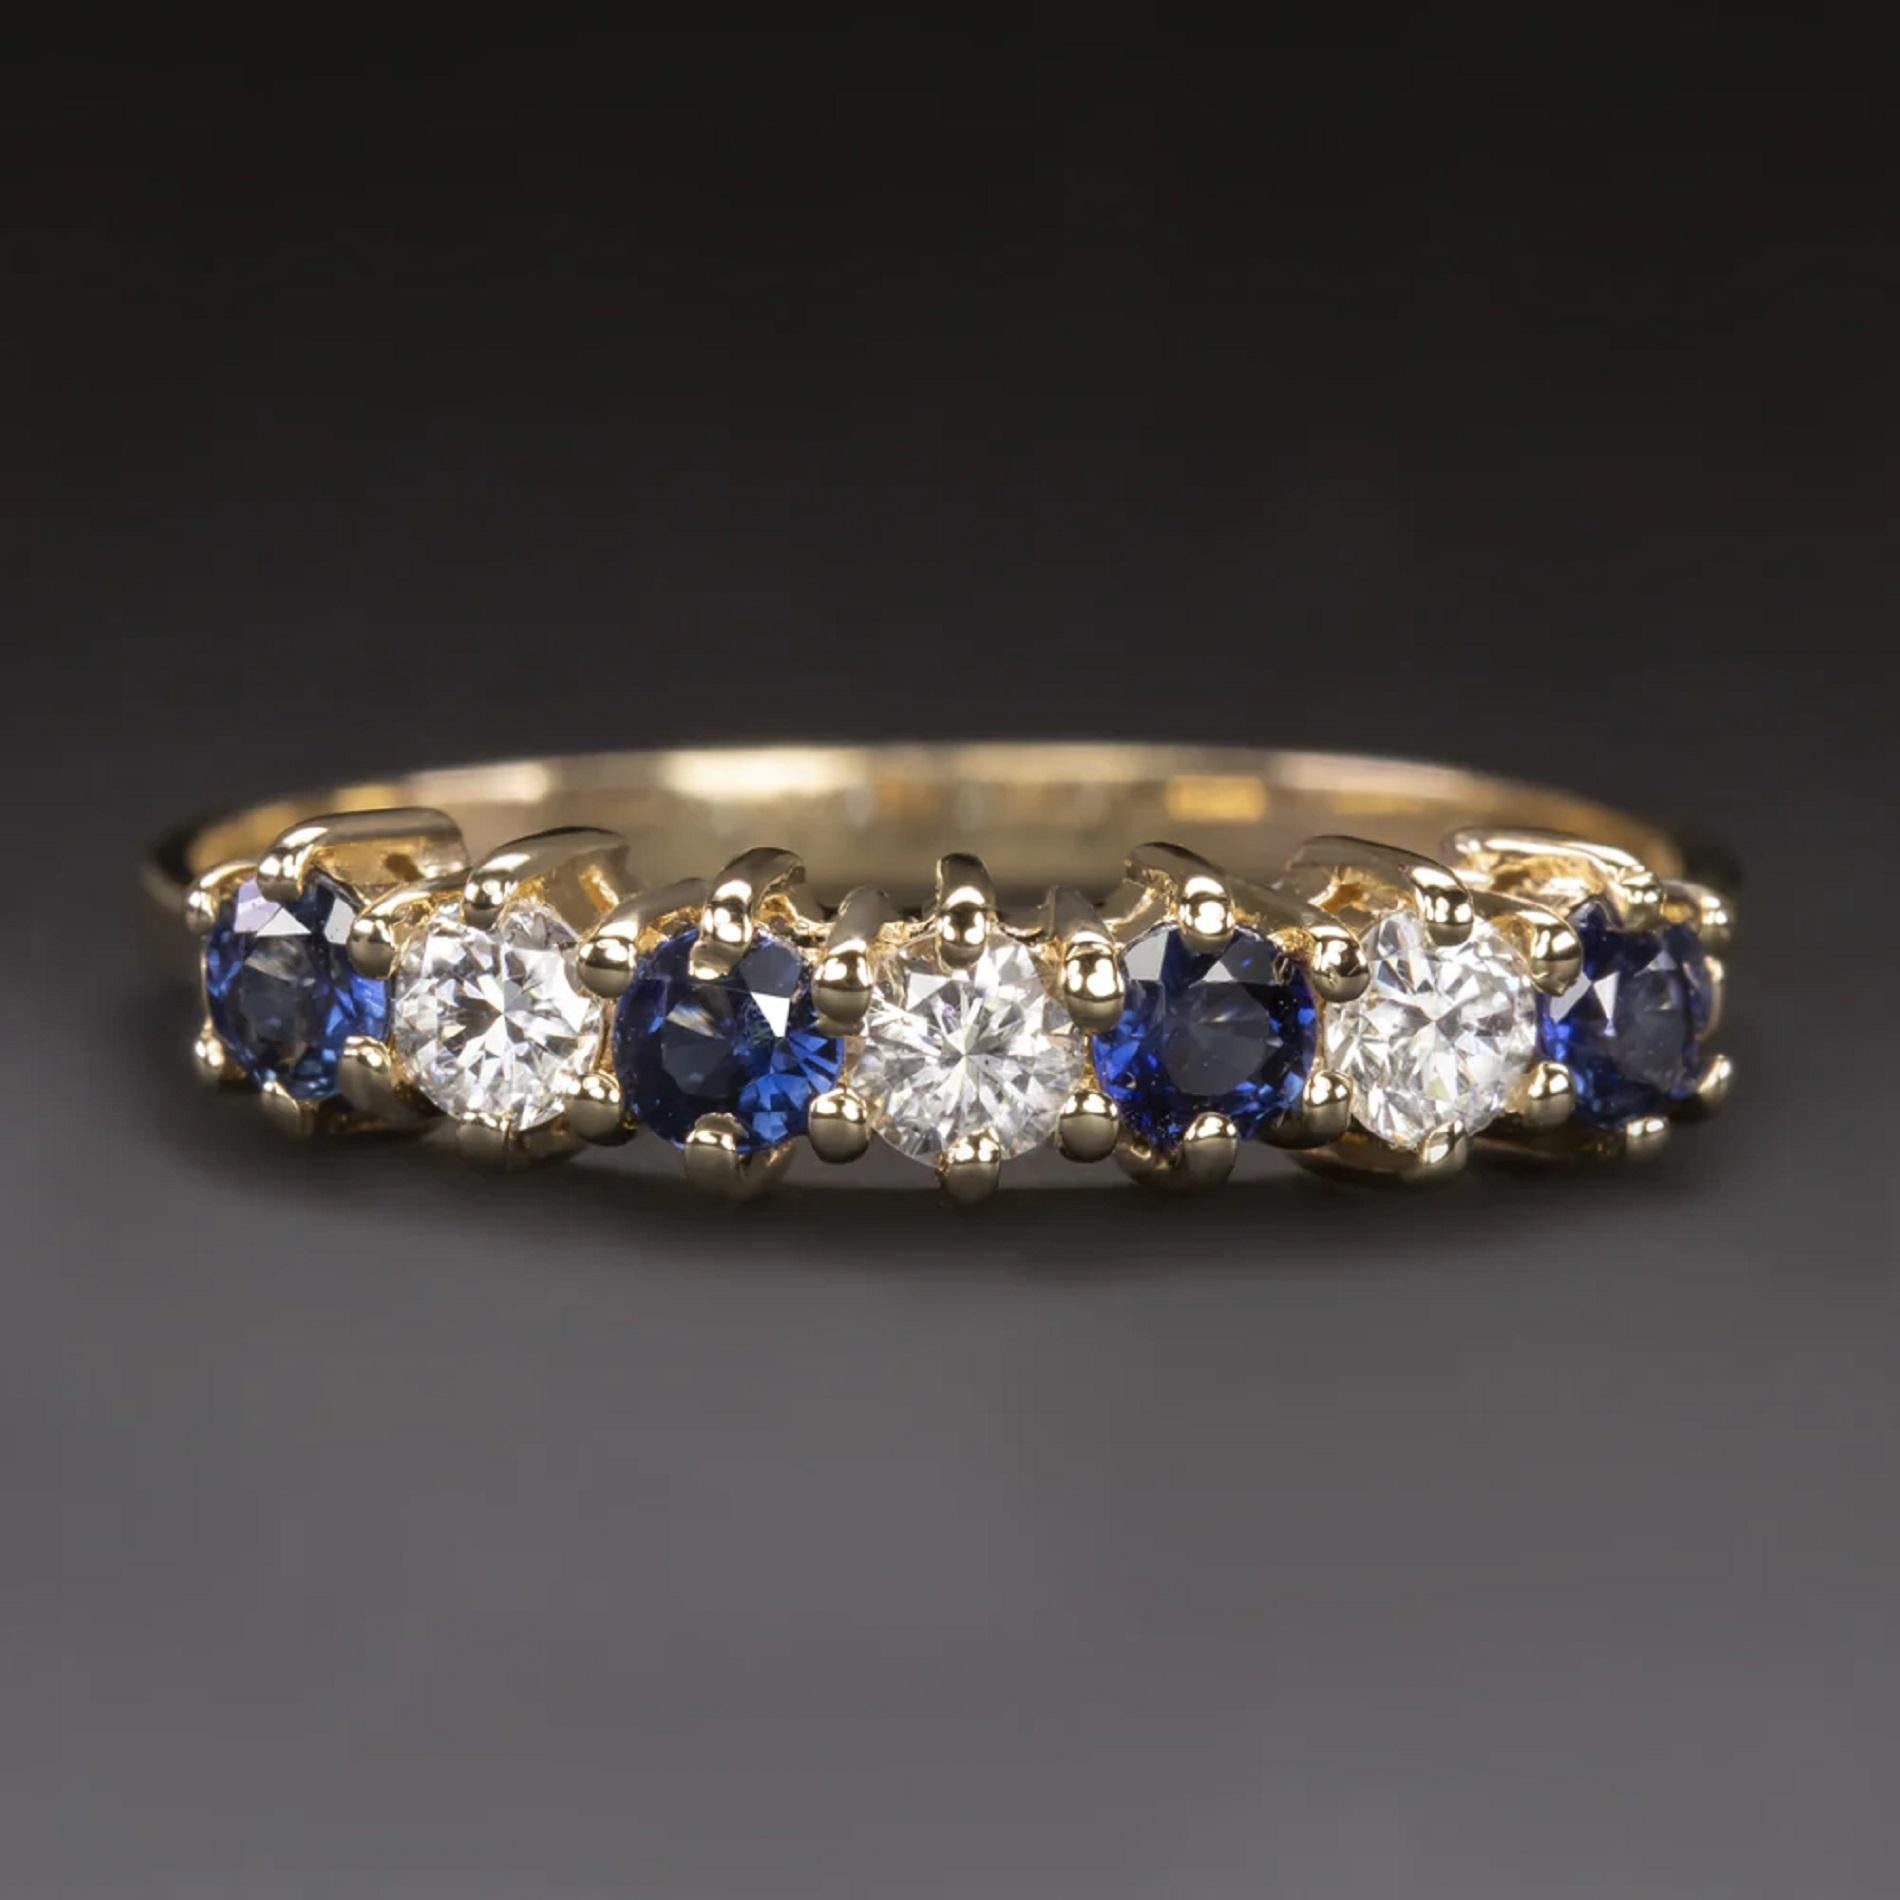 This diamond and sapphire ring offers rich color and bright sparkle! It is a great choice for a wedding band or a stand alone piece.

Highlights:

- 0.25ct of bright white and completely eye clean diamonds

- Royal blue sapphires

- Buttery 14k